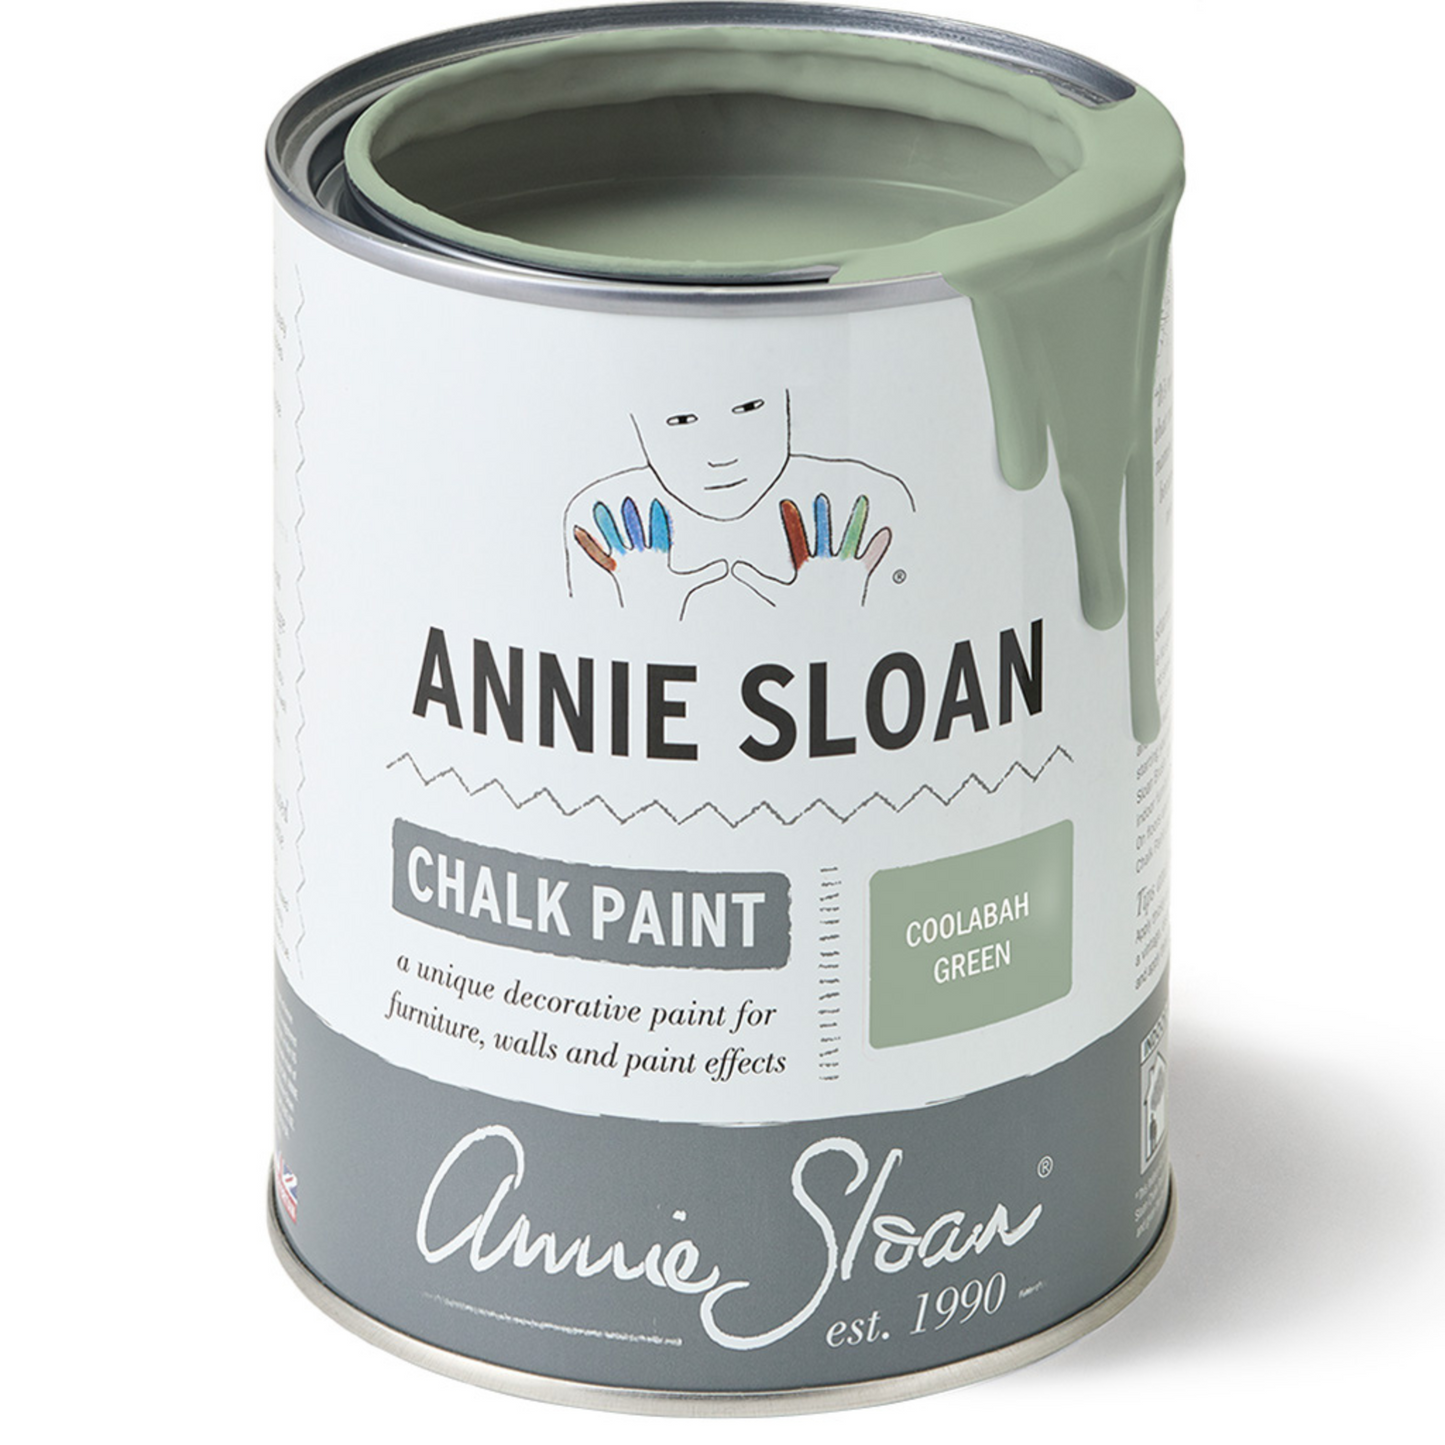 Can of Coolabah Green Annie Sloan Chalk Paint.